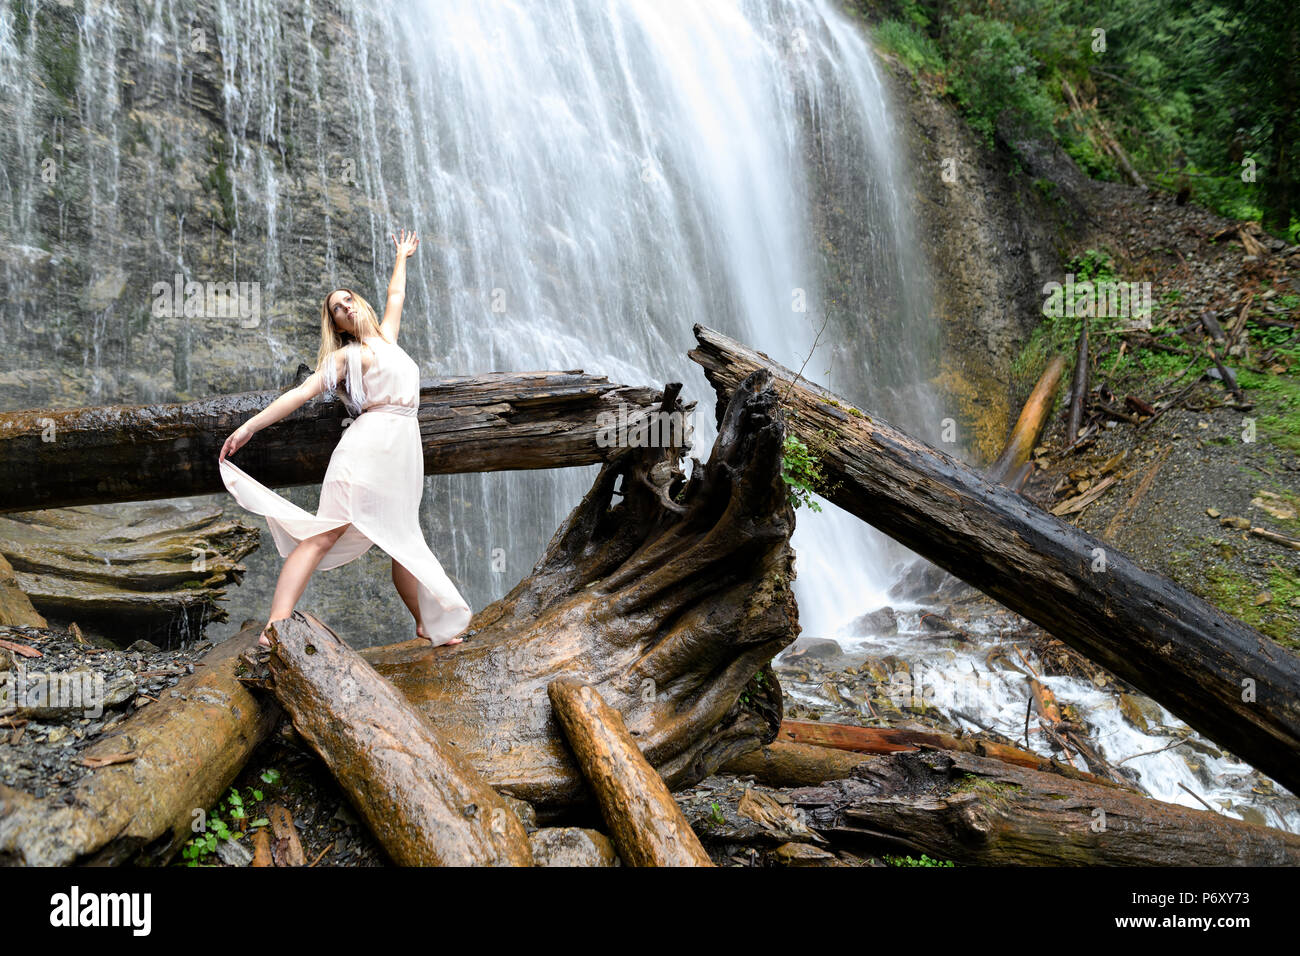 Young woman in pink dress stands barefoot on log, her arms are raised and doing some dreamlike movement and expressing happy feeling at the Bridal Vei Stock Photo